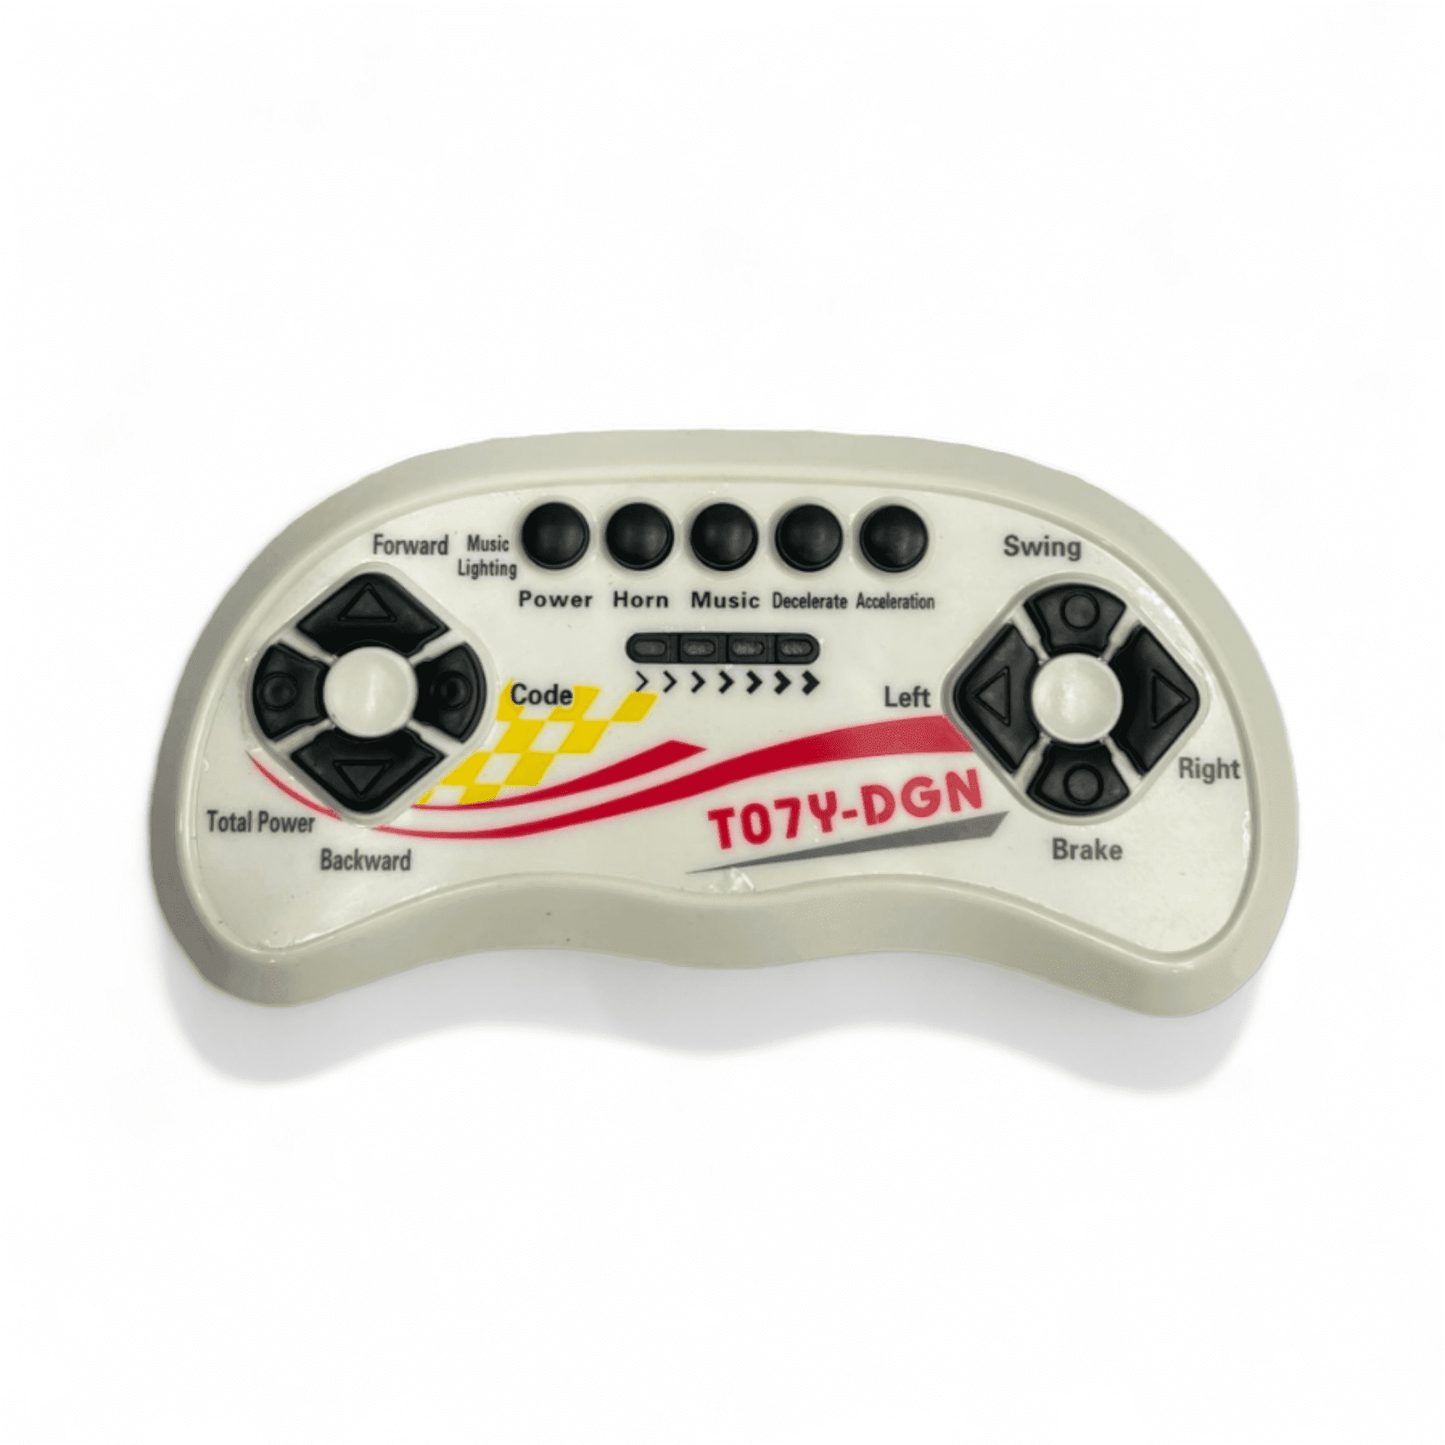 PATOYS | T07W-DGN remote controller for children’s electric vehicle - PATOYS